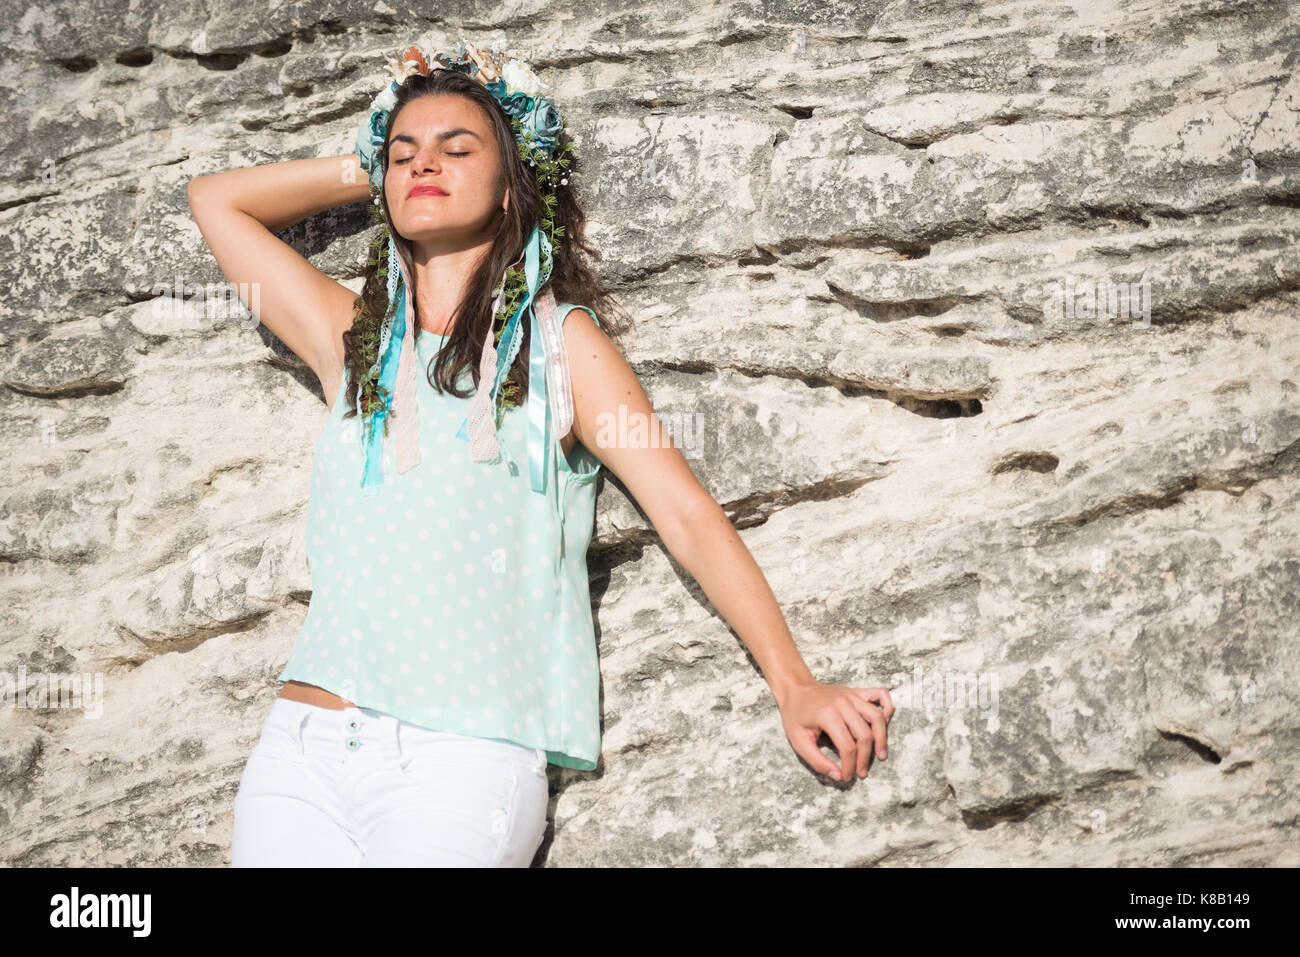 Young woman in blue shirt and white shorts with flower head band enjoying the moment Stock Photo